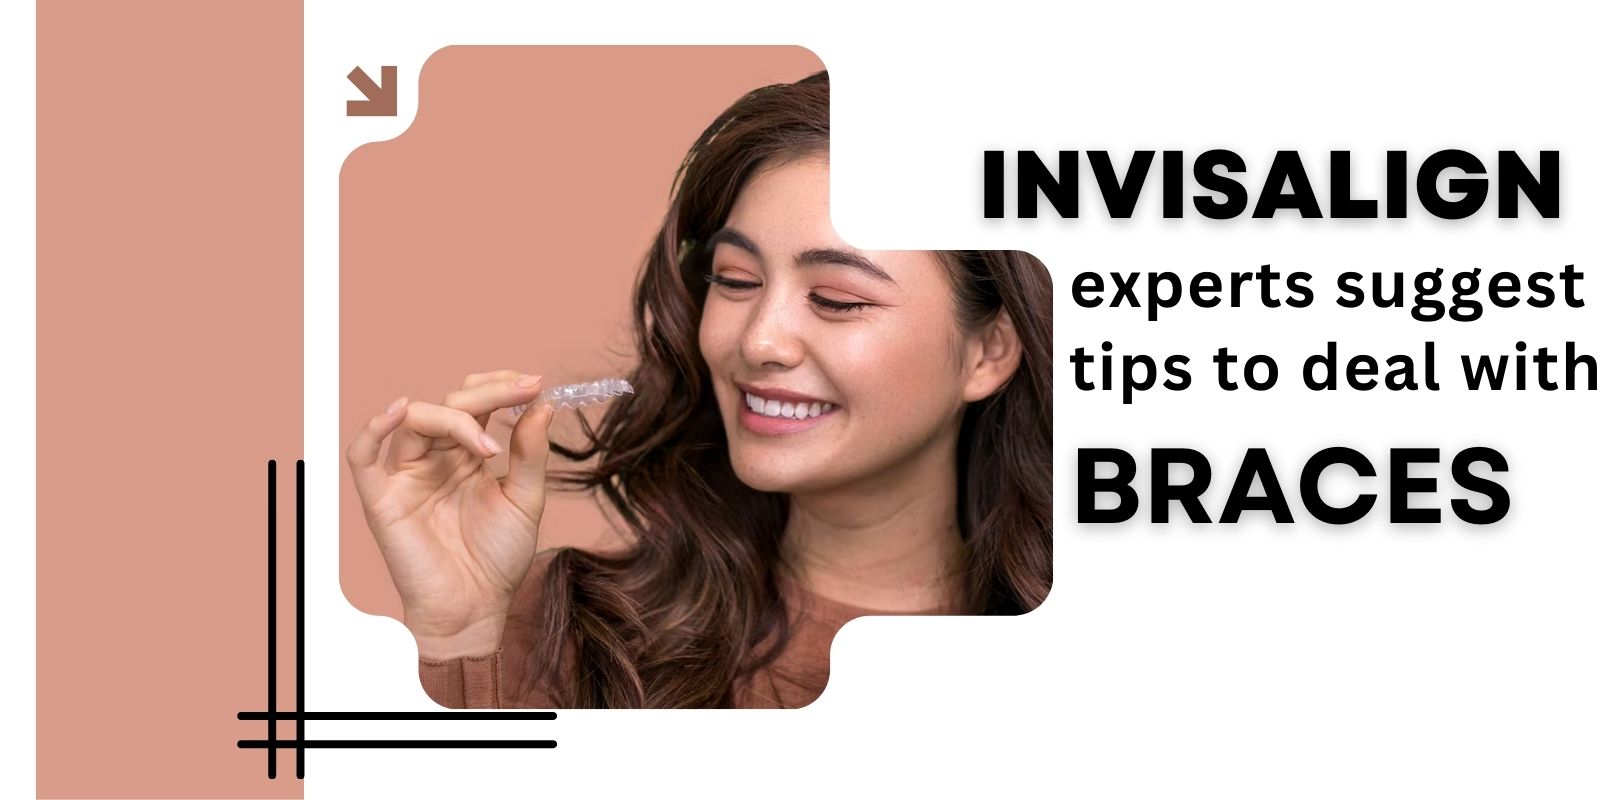 Invisalign experts suggest tips to deal with braces easily